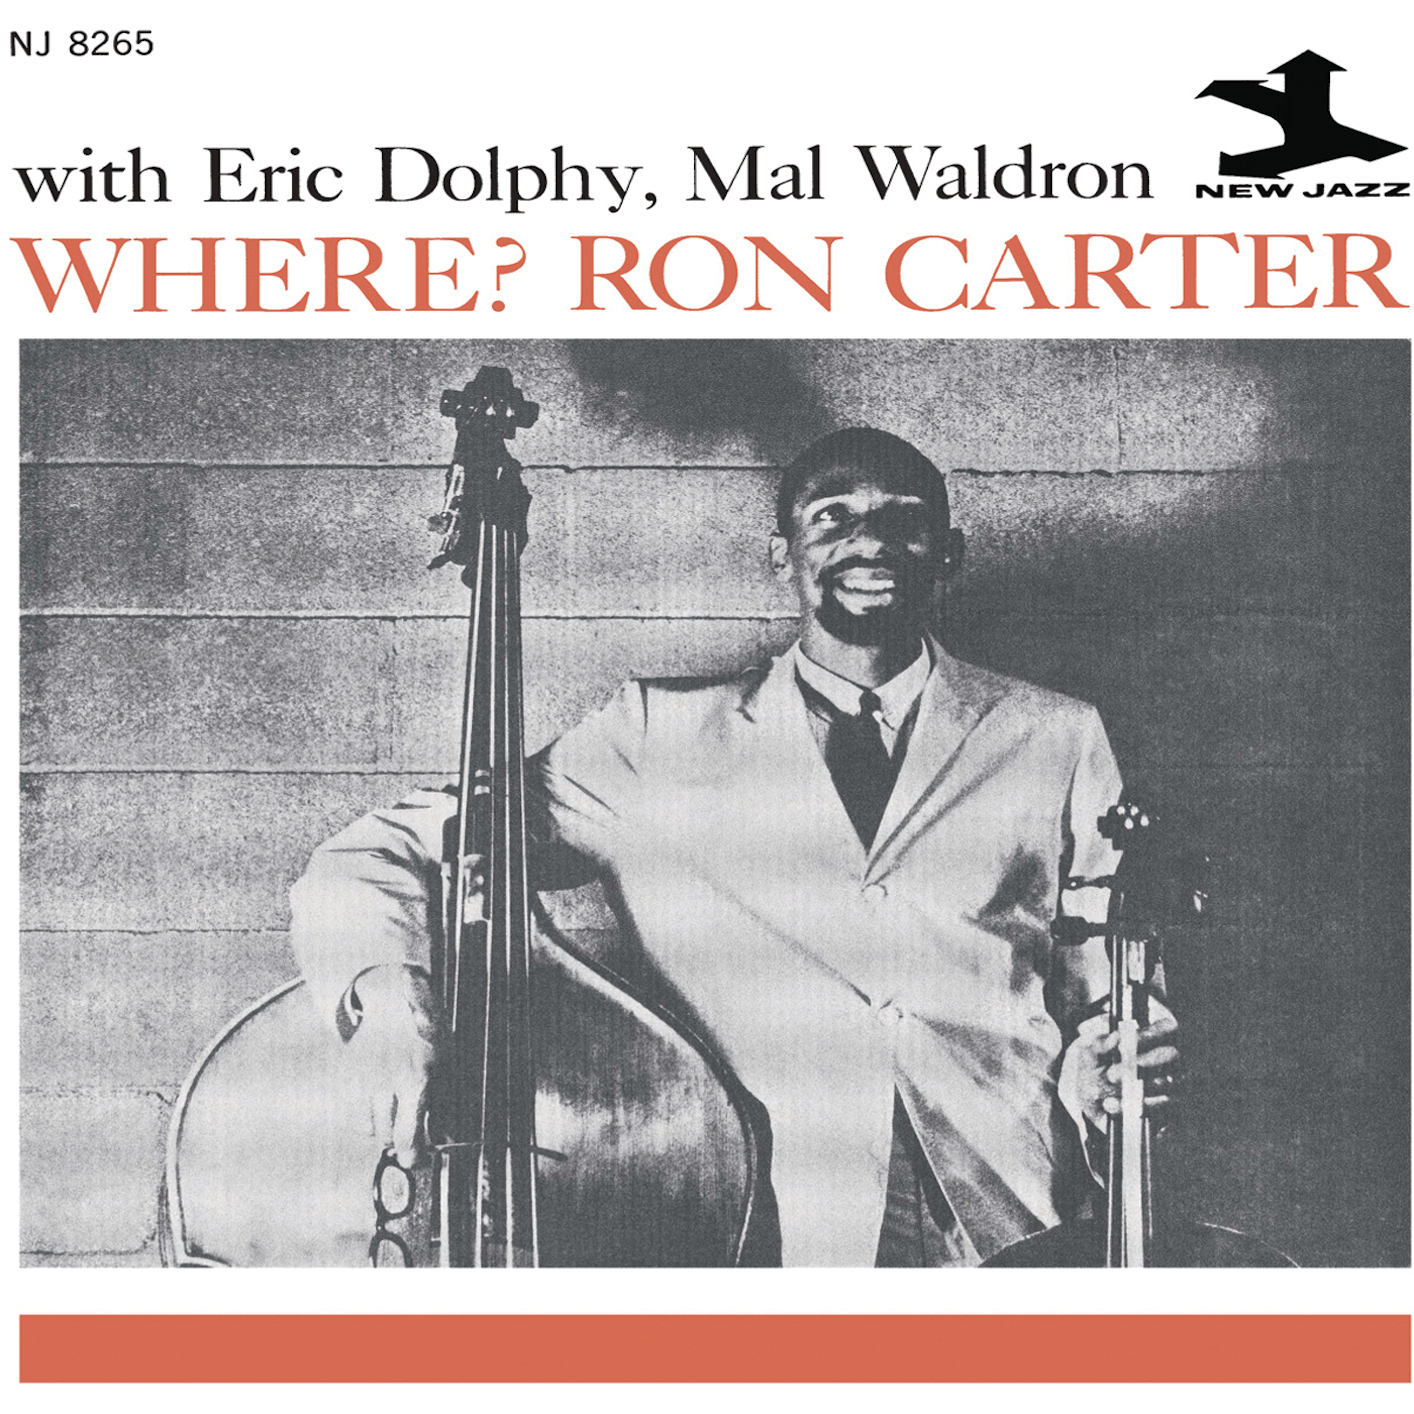 Ron Carter with Eric Dolphy, Mal Waldron - Where? (1961/2014) [FLAC 24bit/44,1kHz]